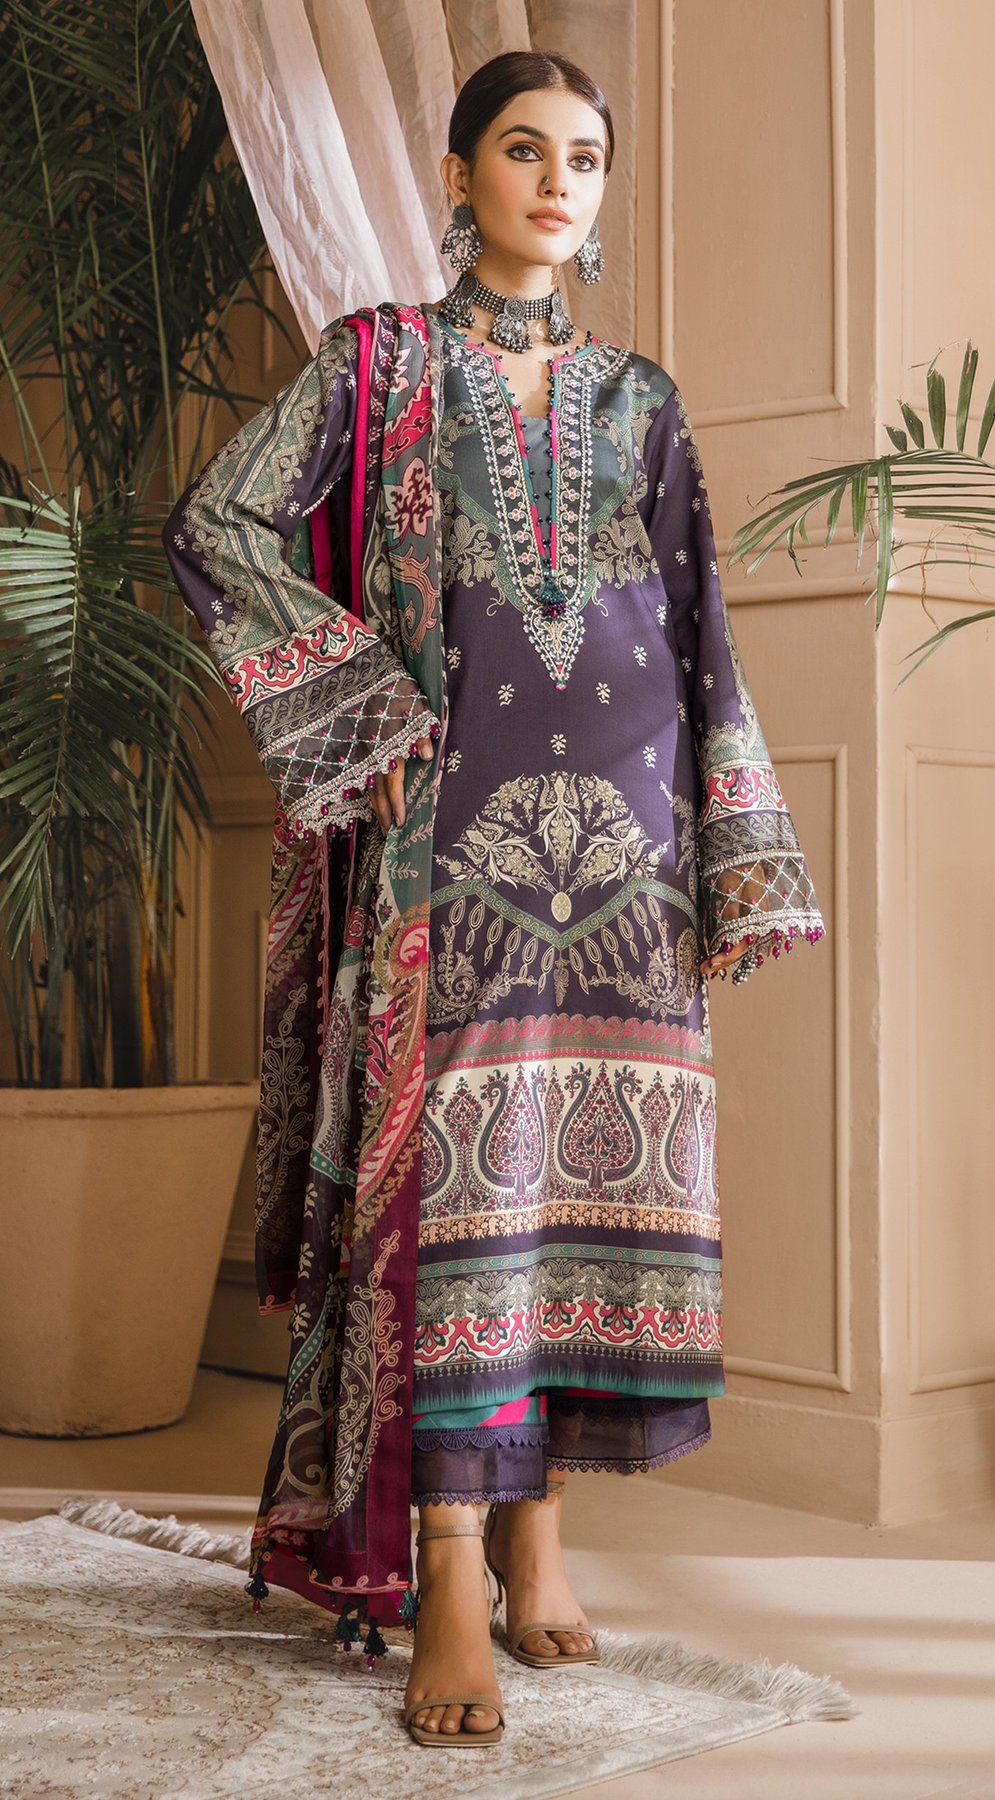 Sahar | Anaya by Kiran Chaudhry | Noor Bano | Unstitched Embroidered Cambric Collection'21